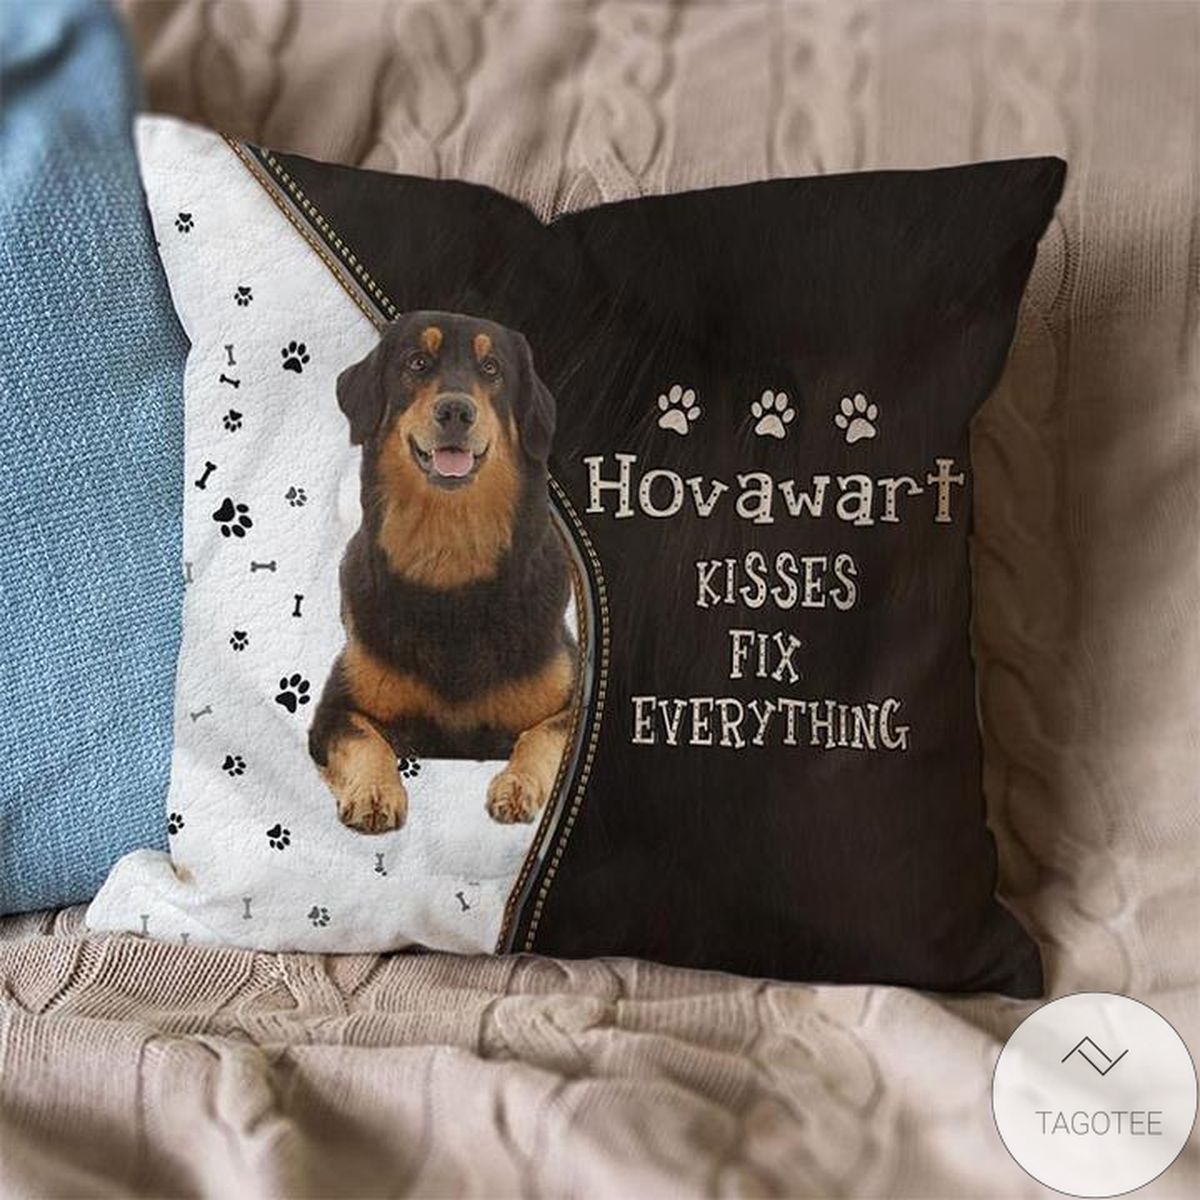 Hovawart Kisses Fix Everything Pillowcase